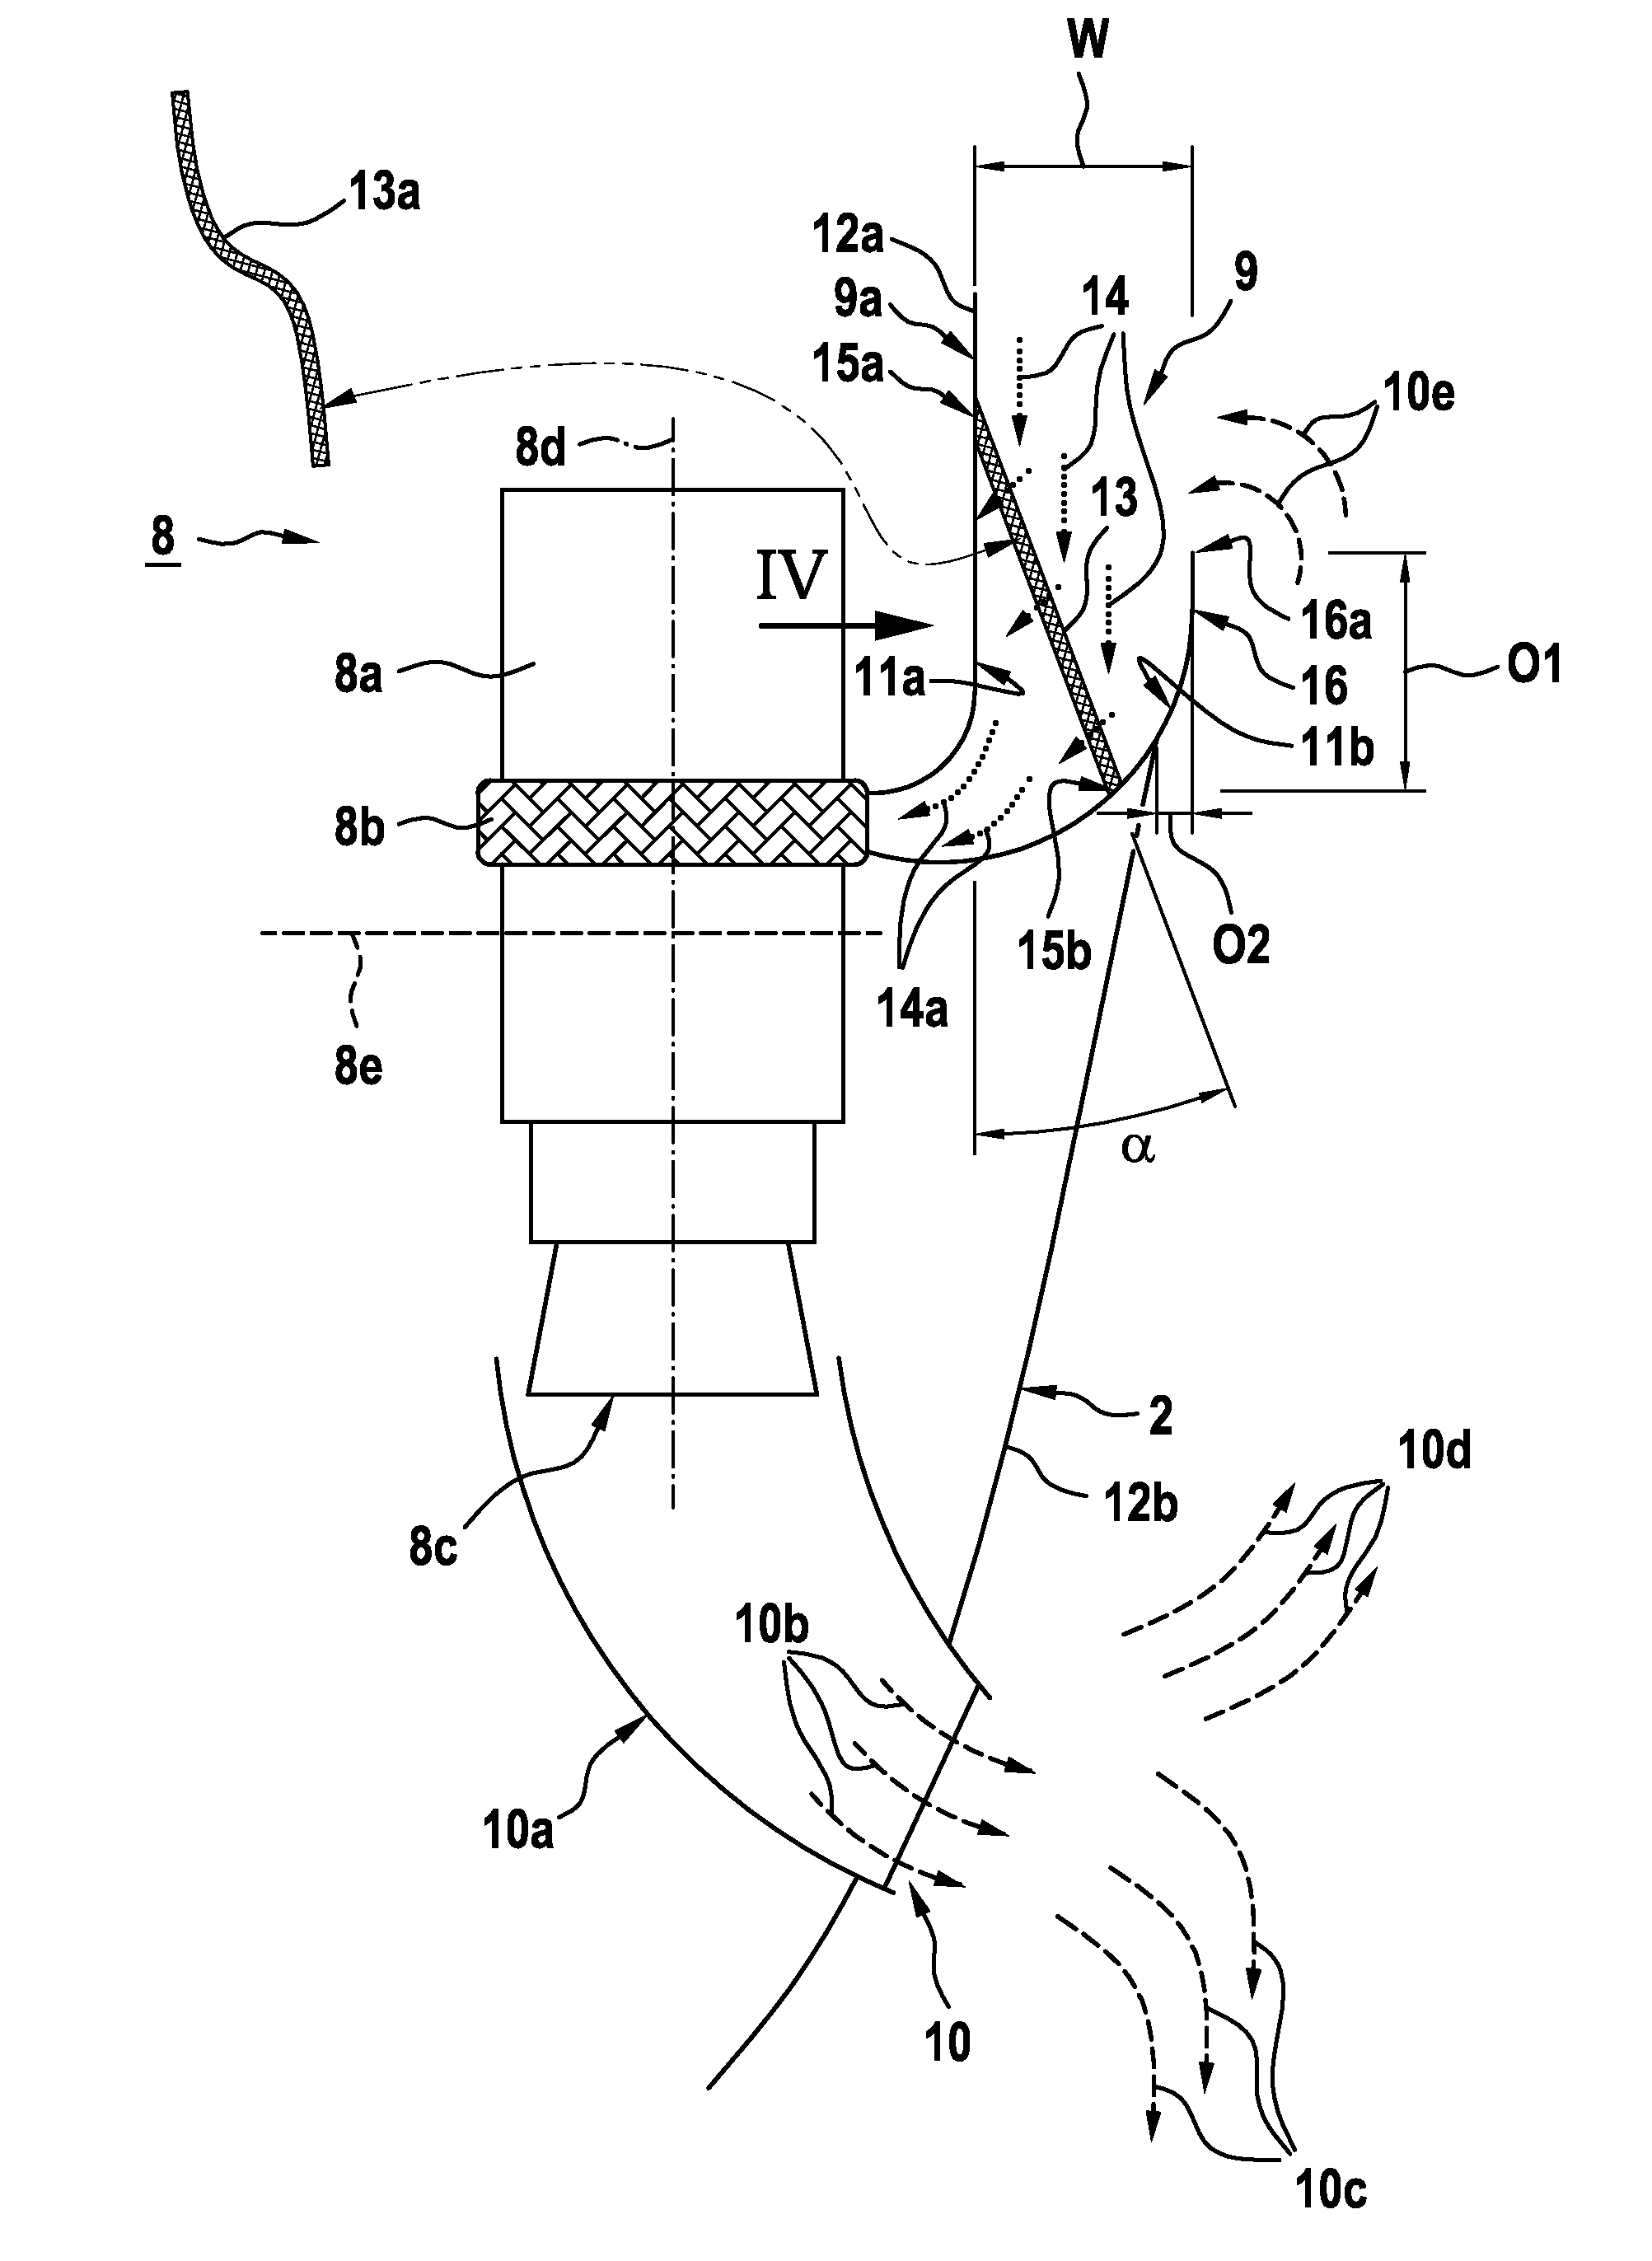 Aircraft with an air intake for an air breathing propulsion engine